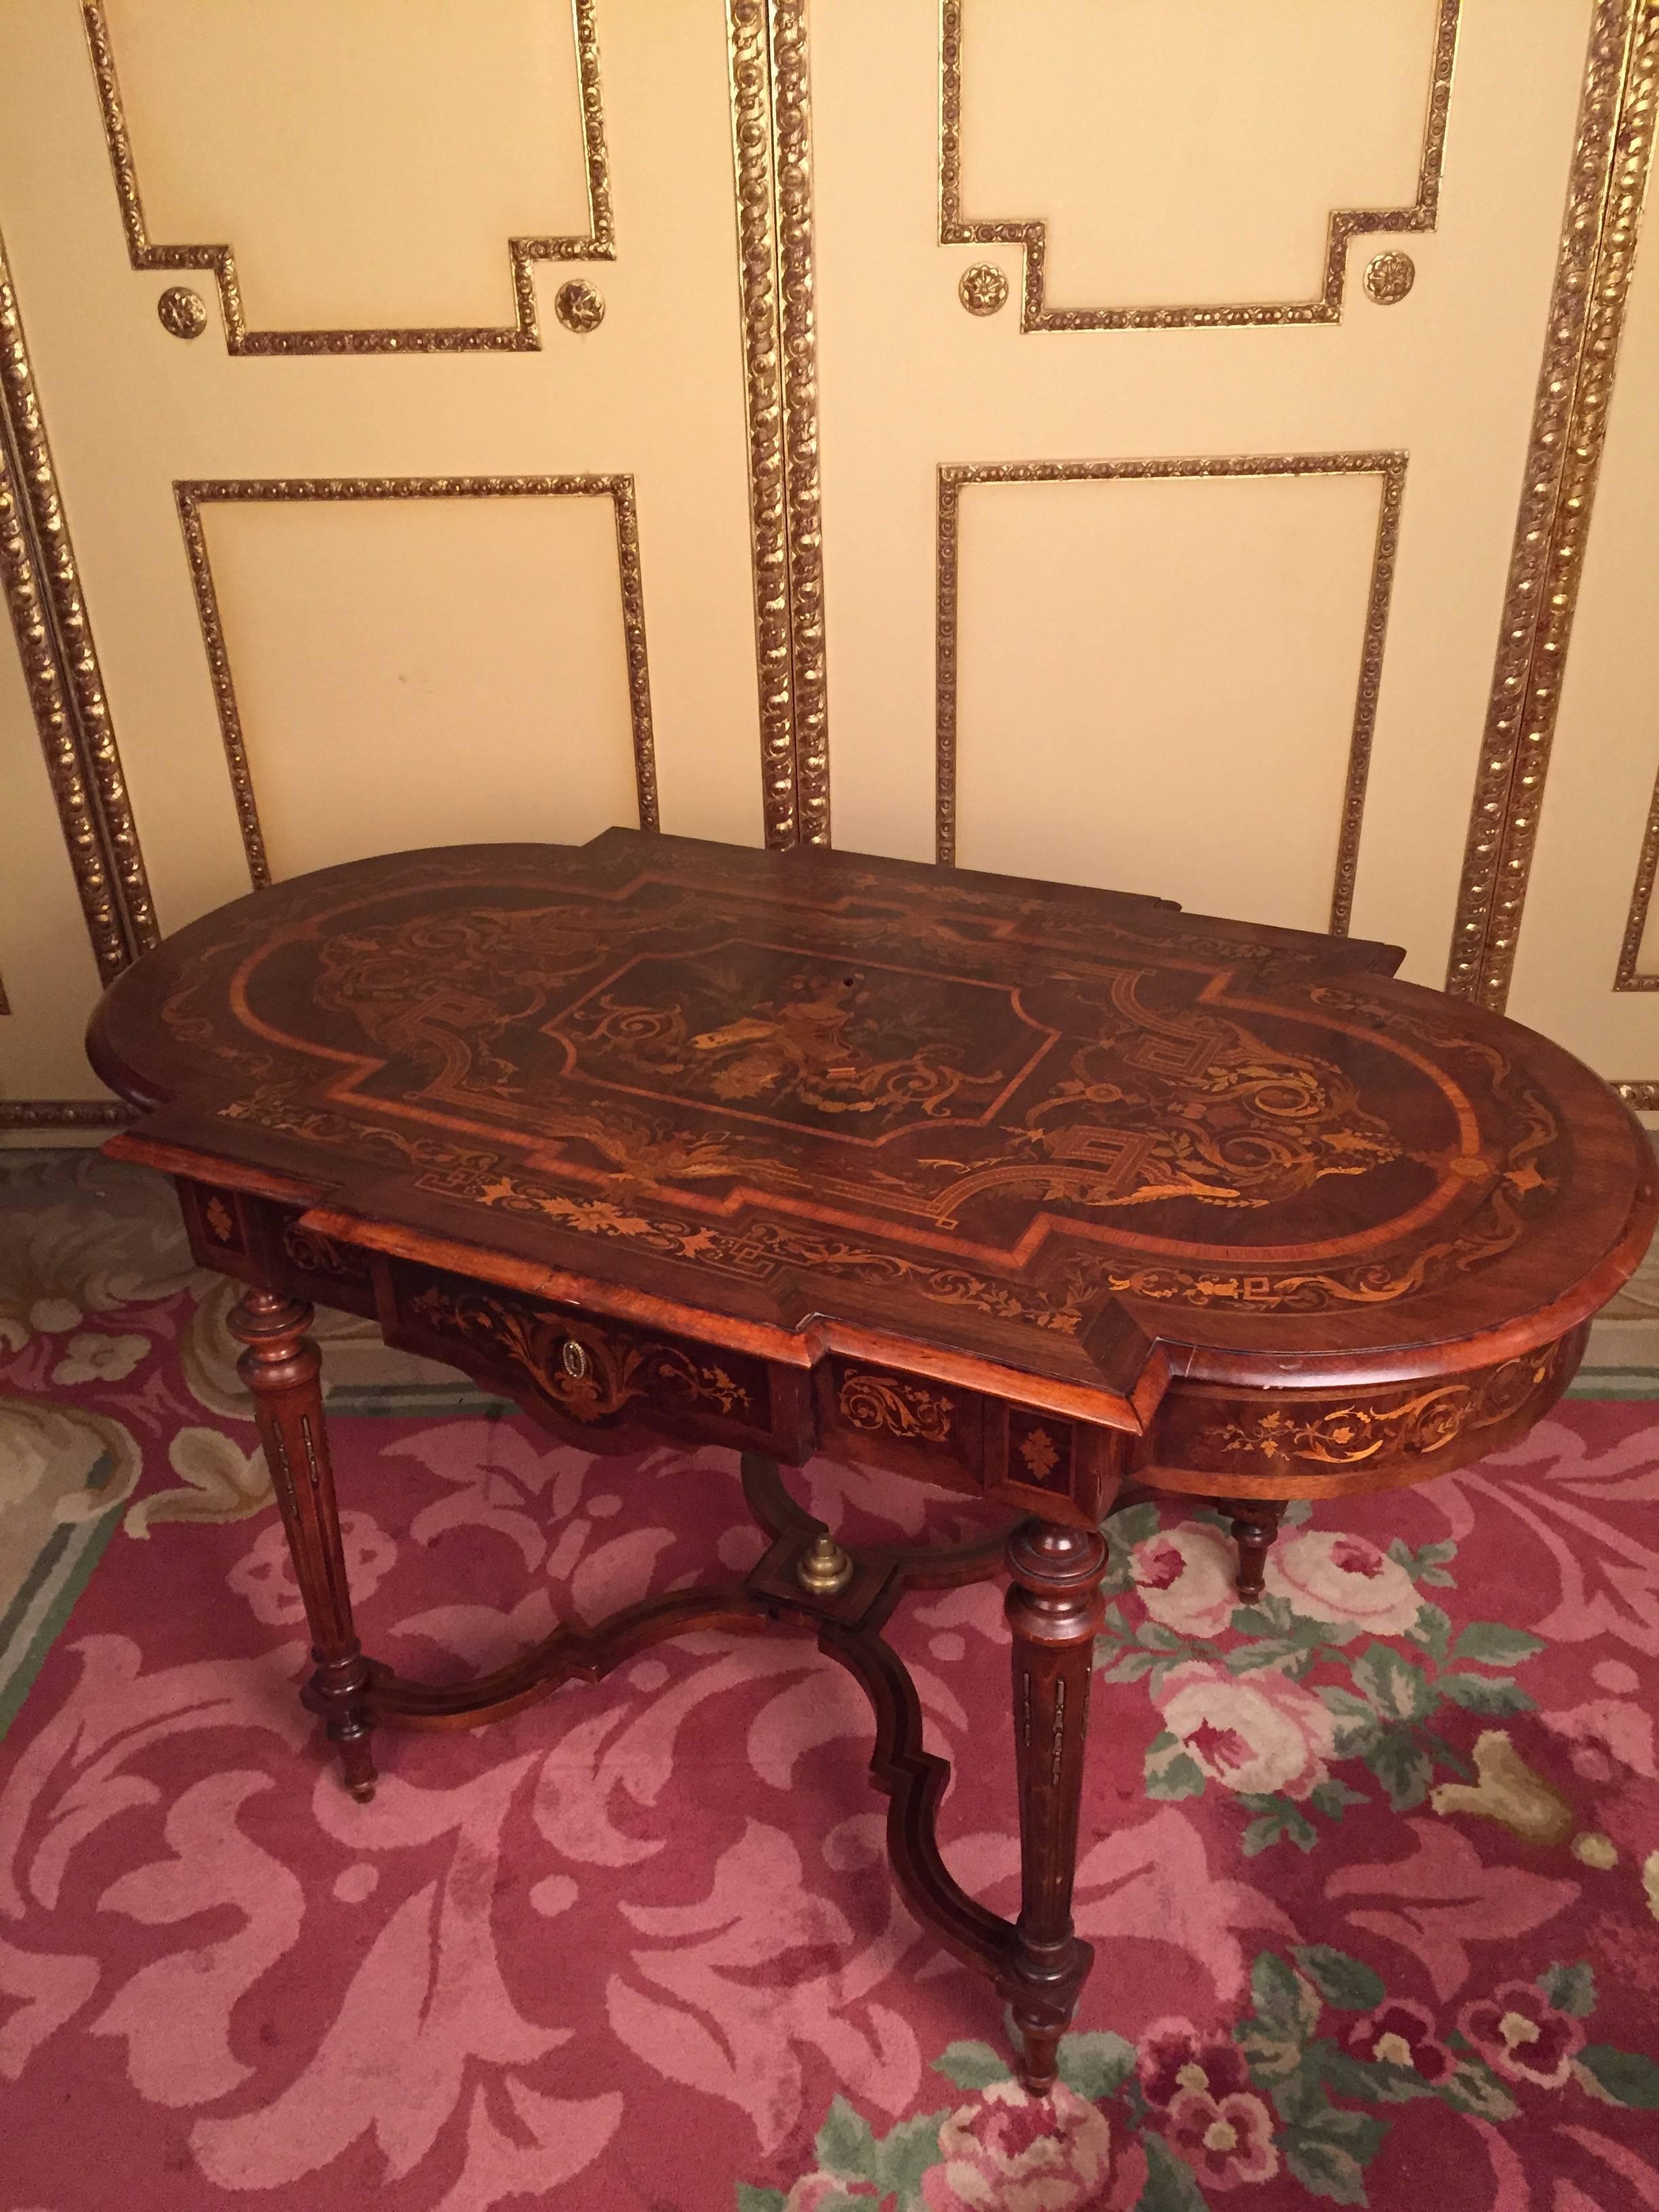 Rectangular with semi-circular sides.
The body stands on conical legs, which are connected to a cross-bridge. Tabletop strongly inlaid with tendrils and foliage.

A drawer with key.
Marketerie with precious wood:
Mahogany and tulip


(A-134).